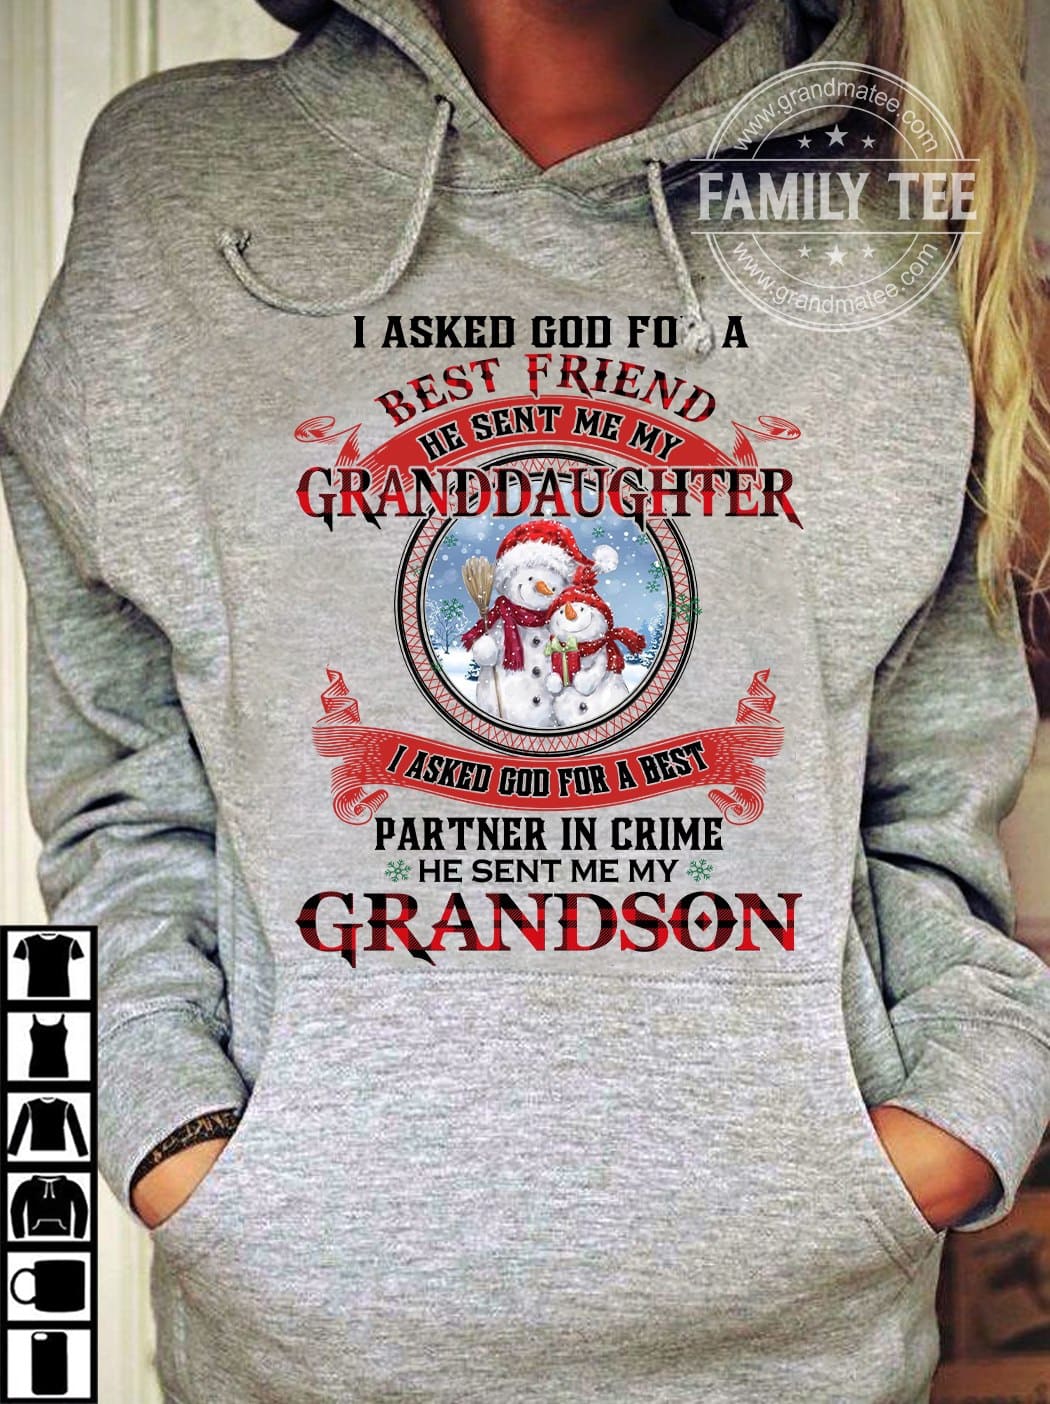 I asked god for a best friend he sent me my granddaughter - Snowman family, Christmas gift for family